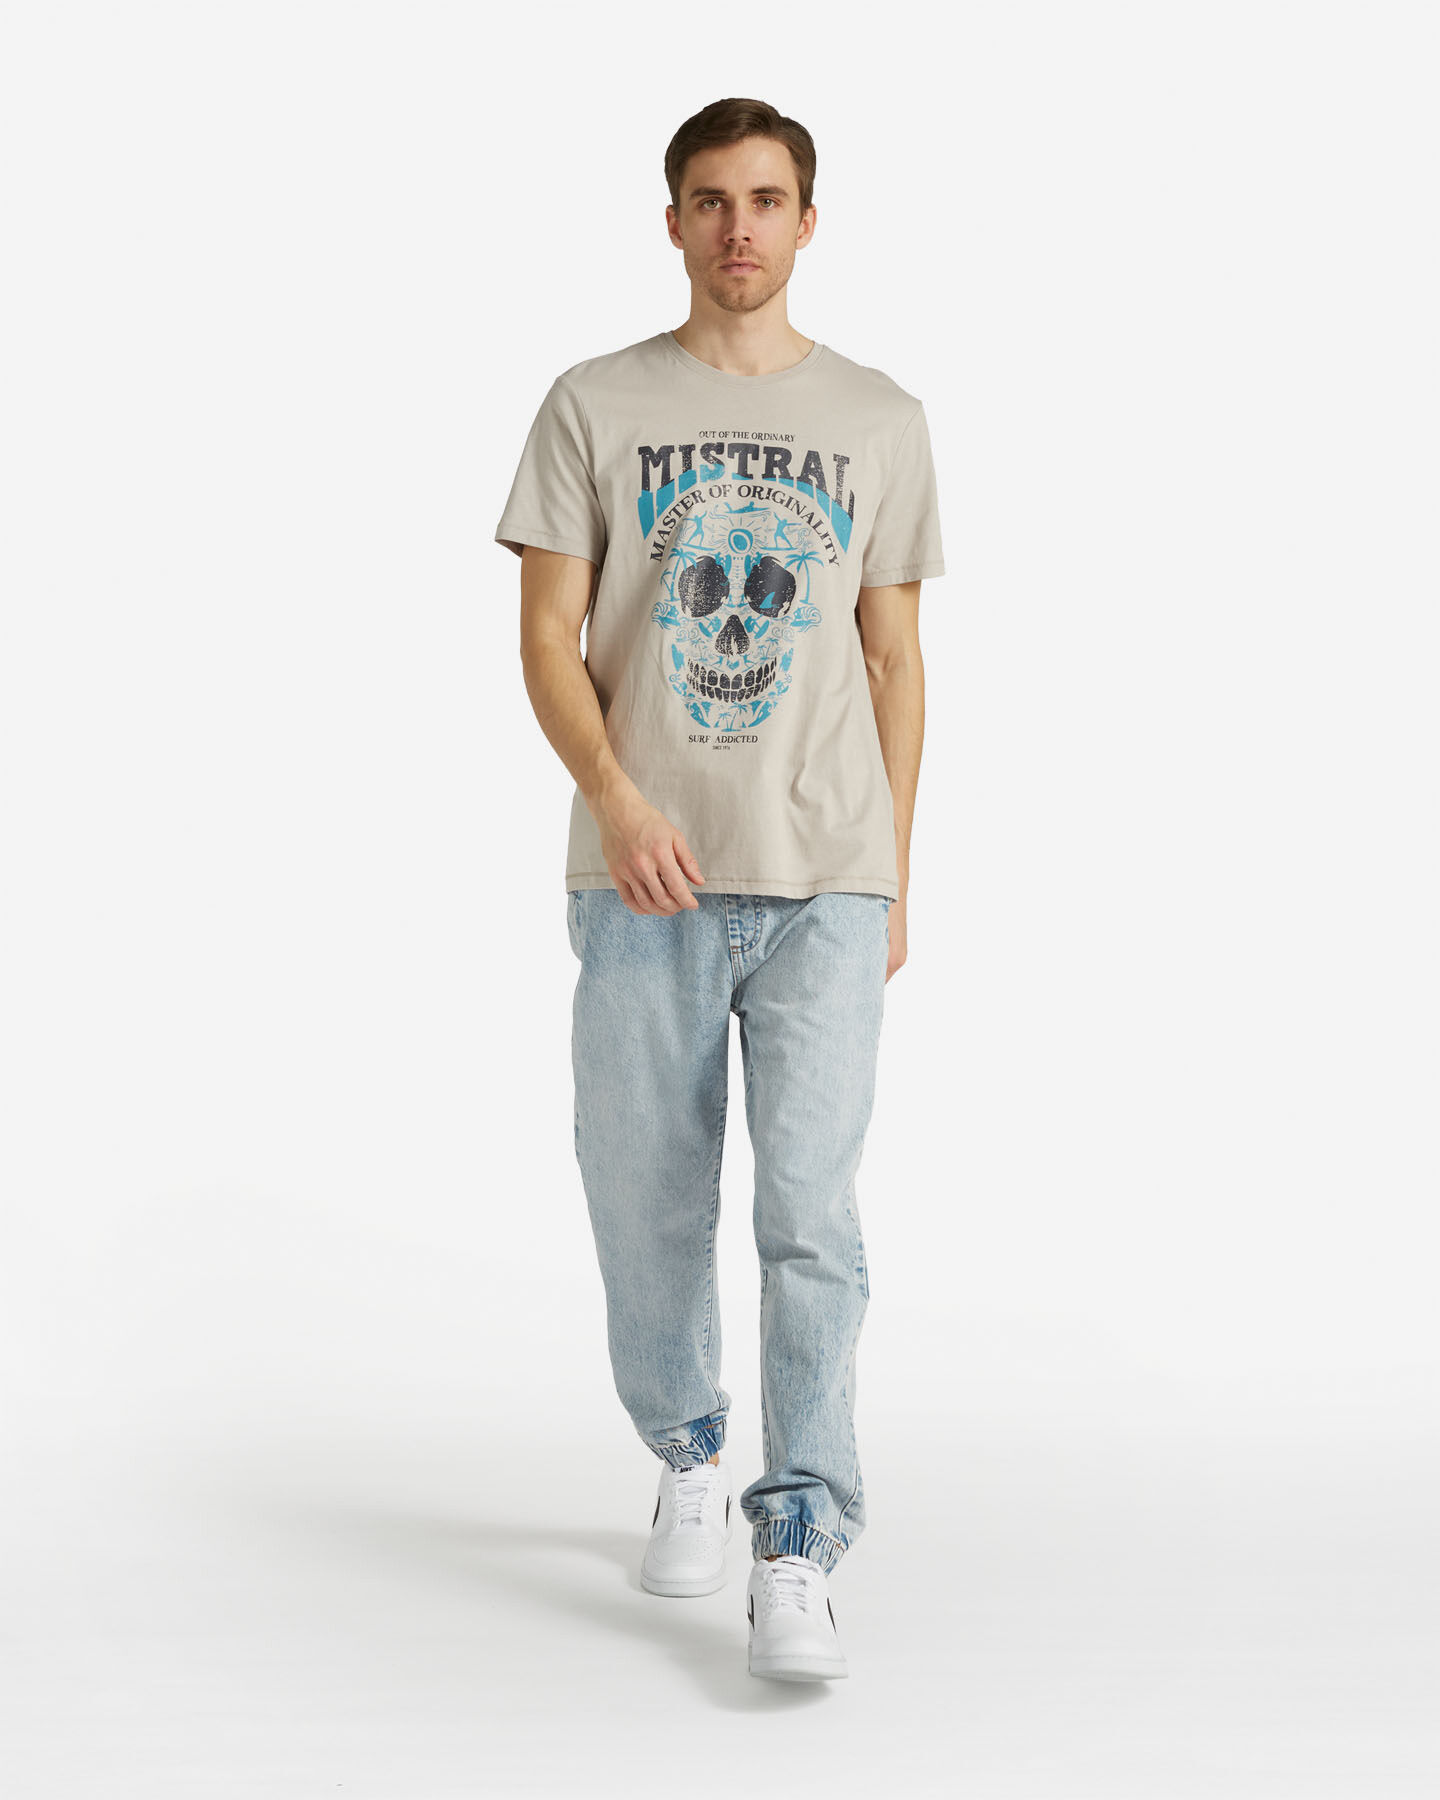  T-Shirt MISTRAL SURFSKULL M S4130285|022|S scatto 3